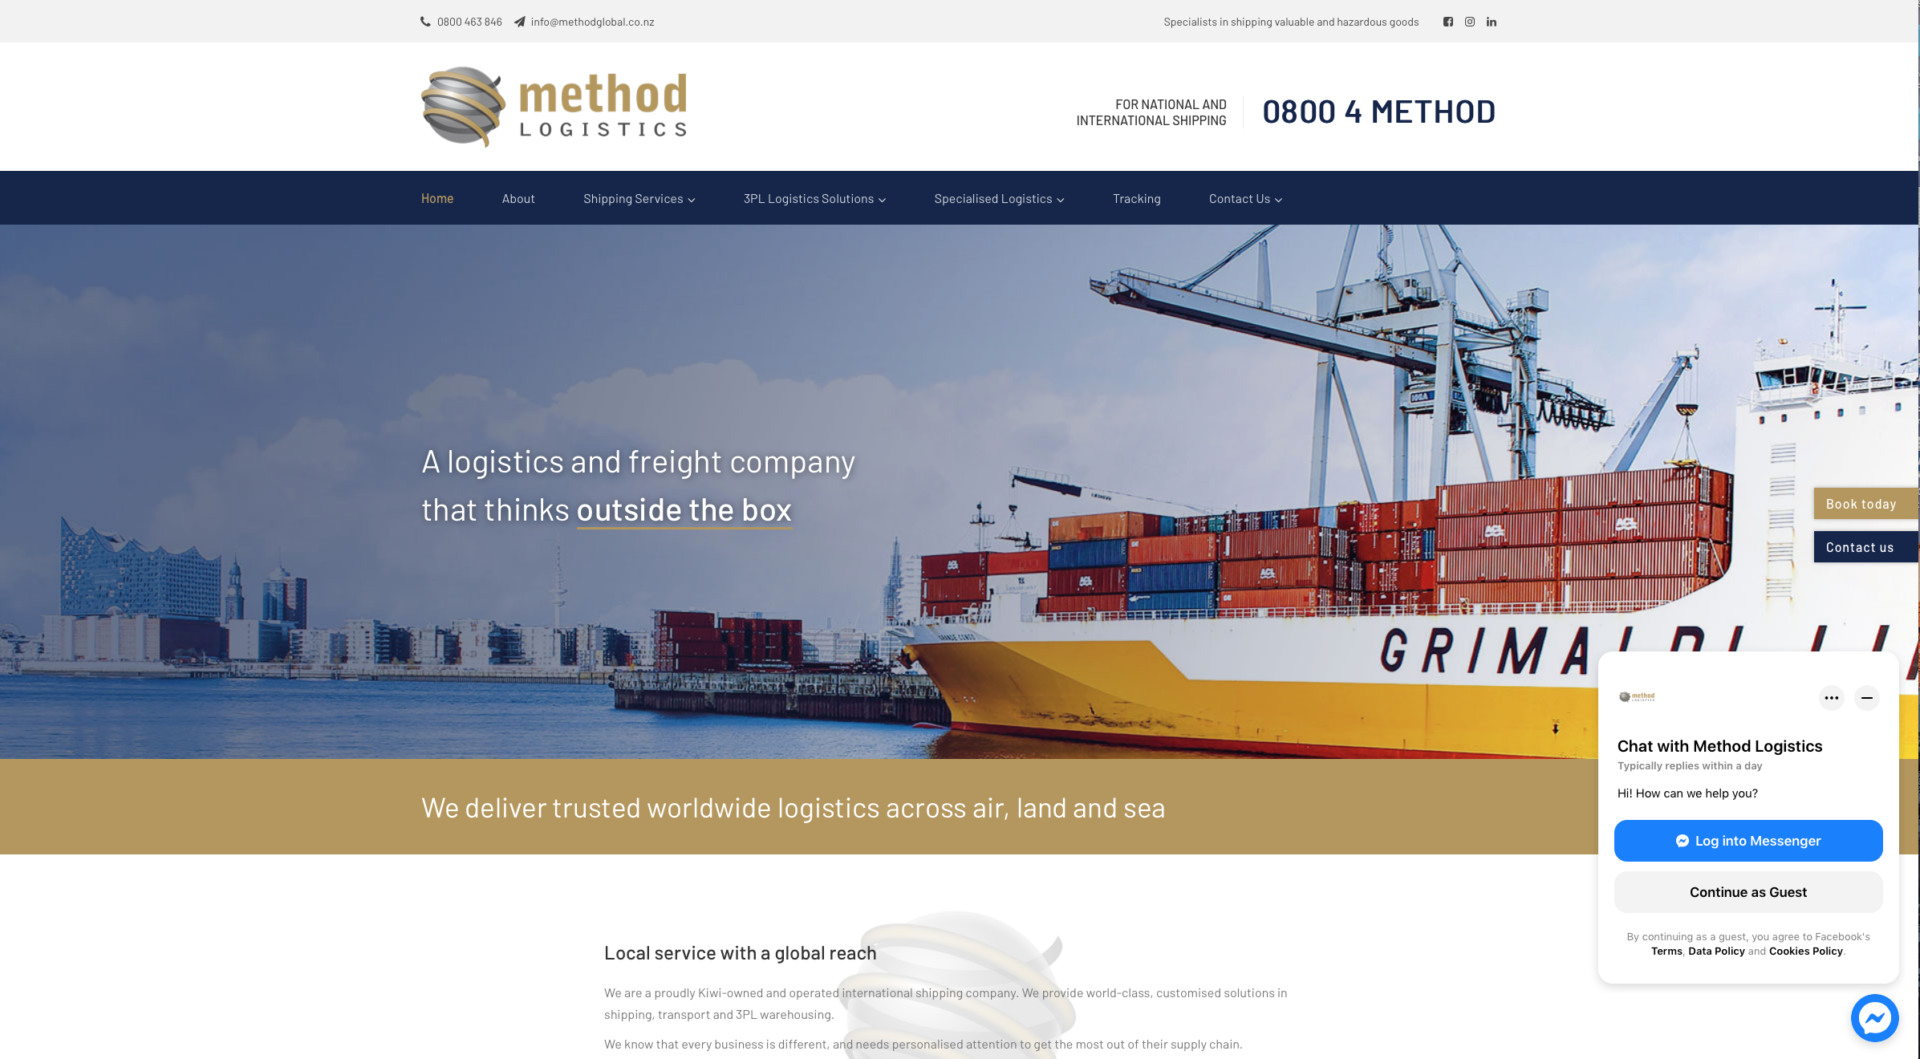 Method logistics New Zealand - website design and development with dark blue and gold colours symbolizing quality of care, logistics and trust for your freight with a business based in Hornby, Christchurch, Selwyn Canterbury